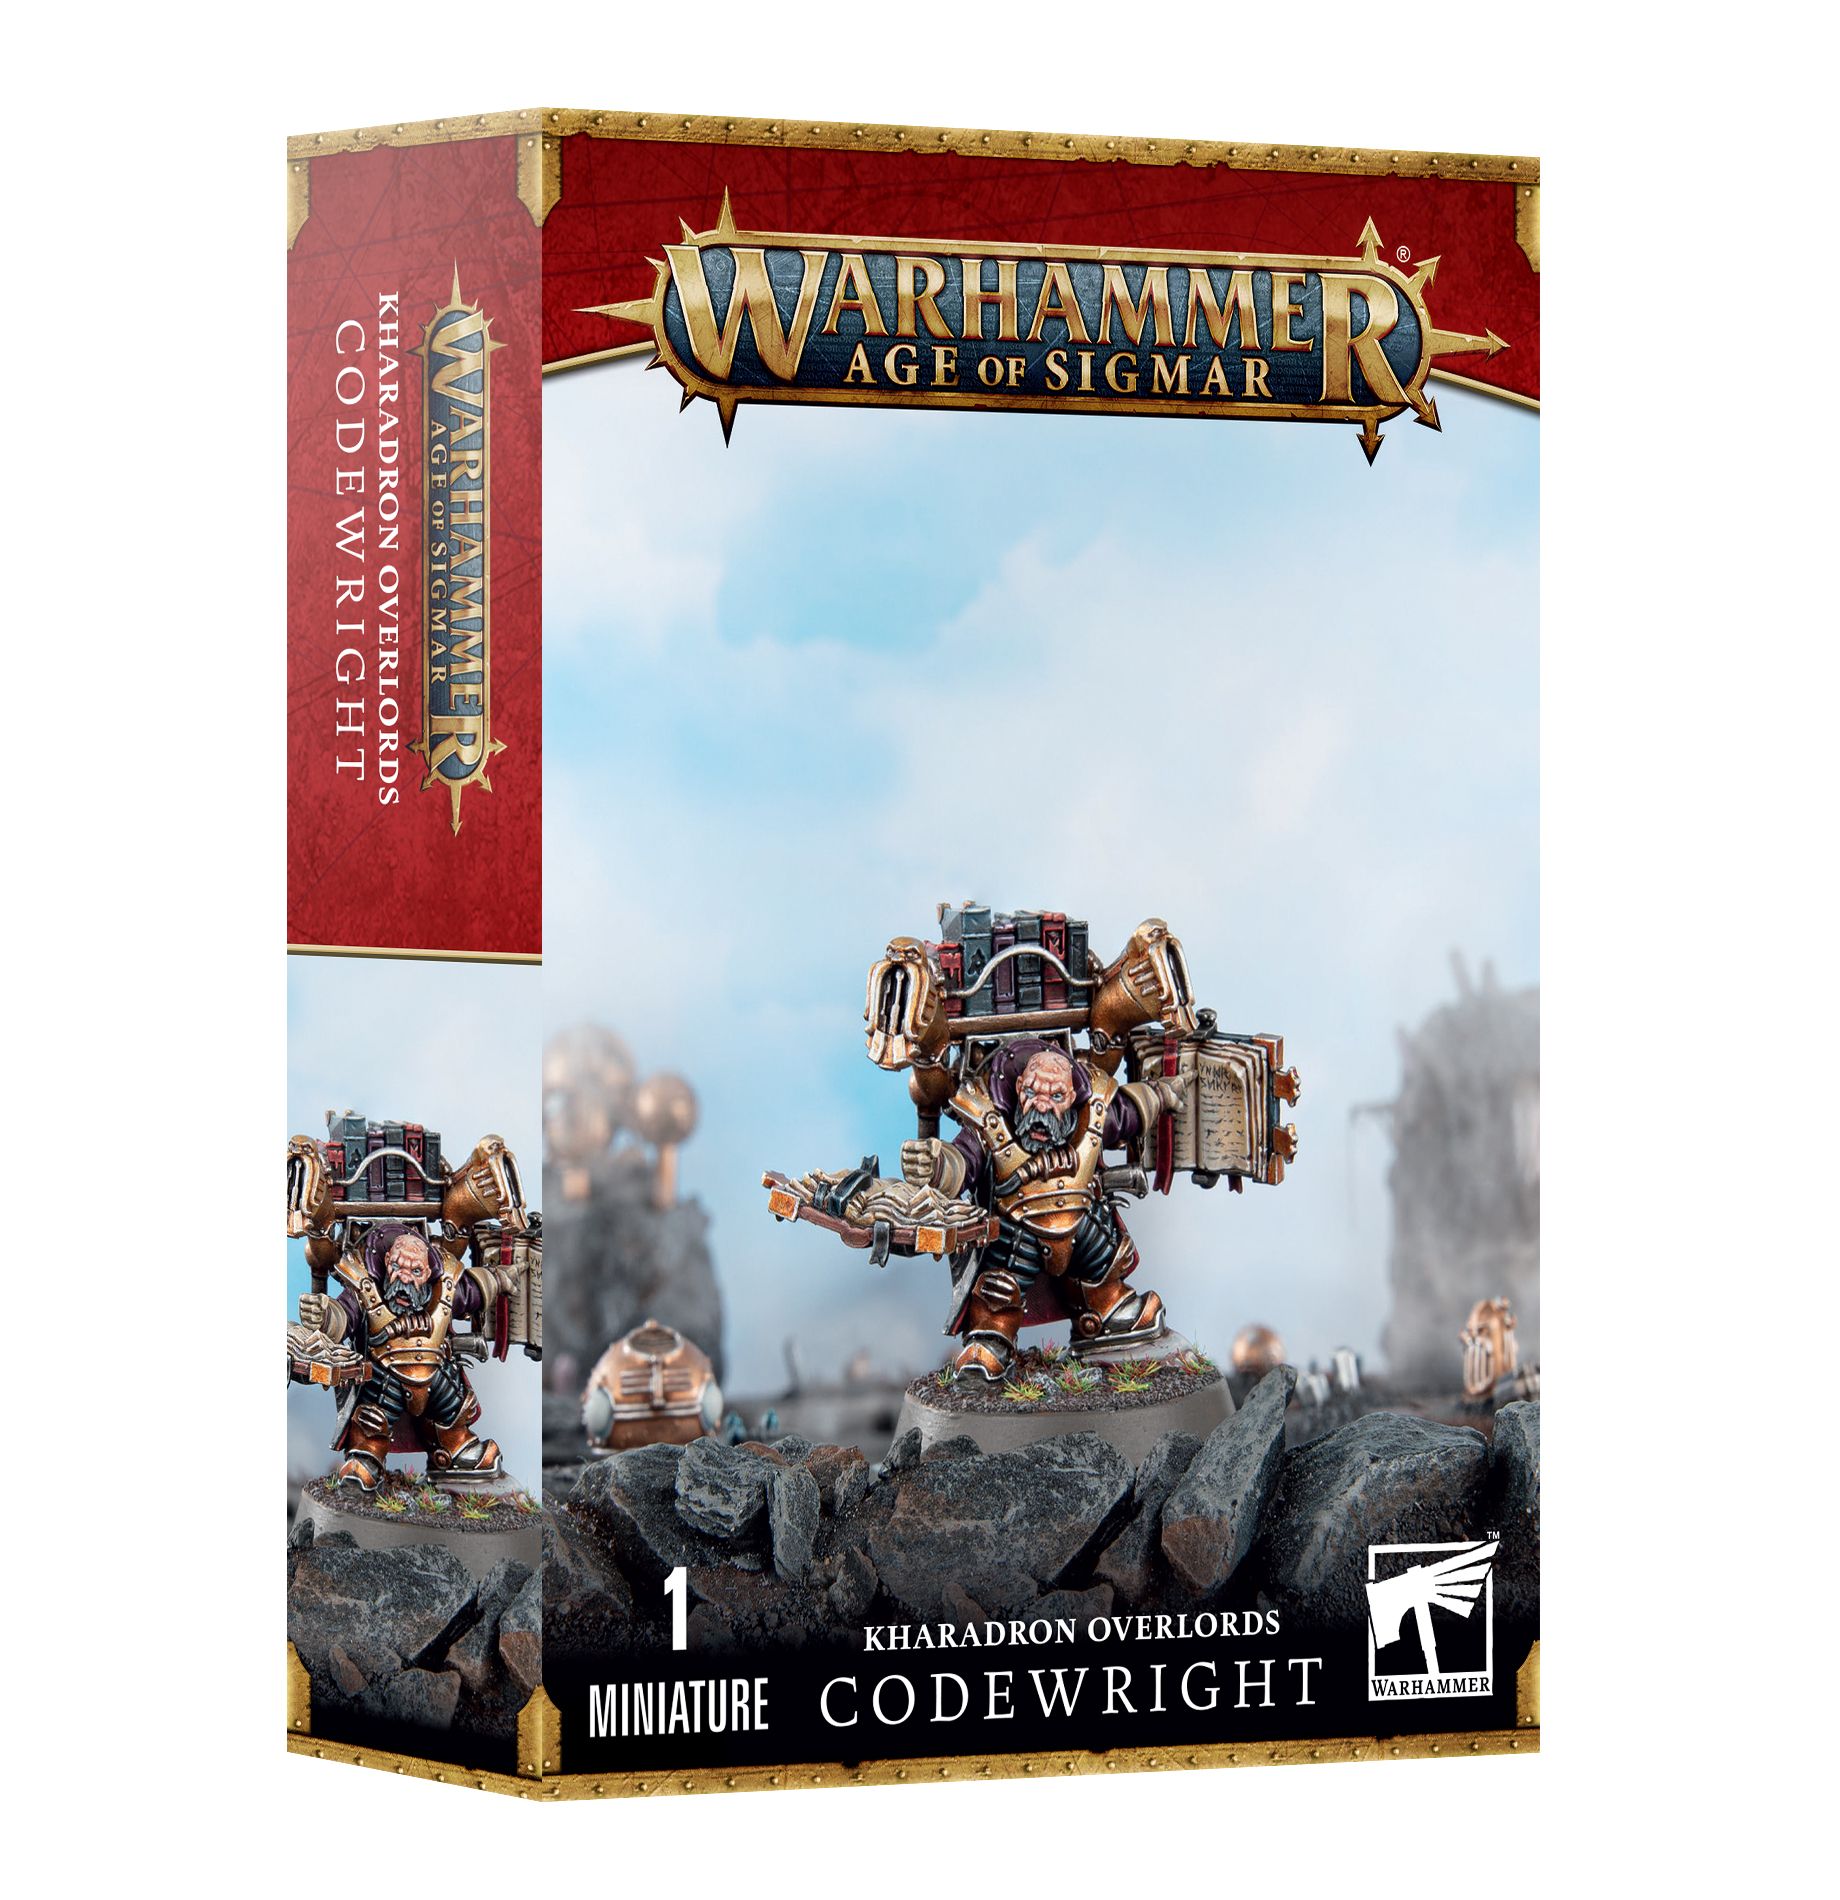 Codewright - 84-61 - Kharadron Overlords - Warhammer Age of Sigmar